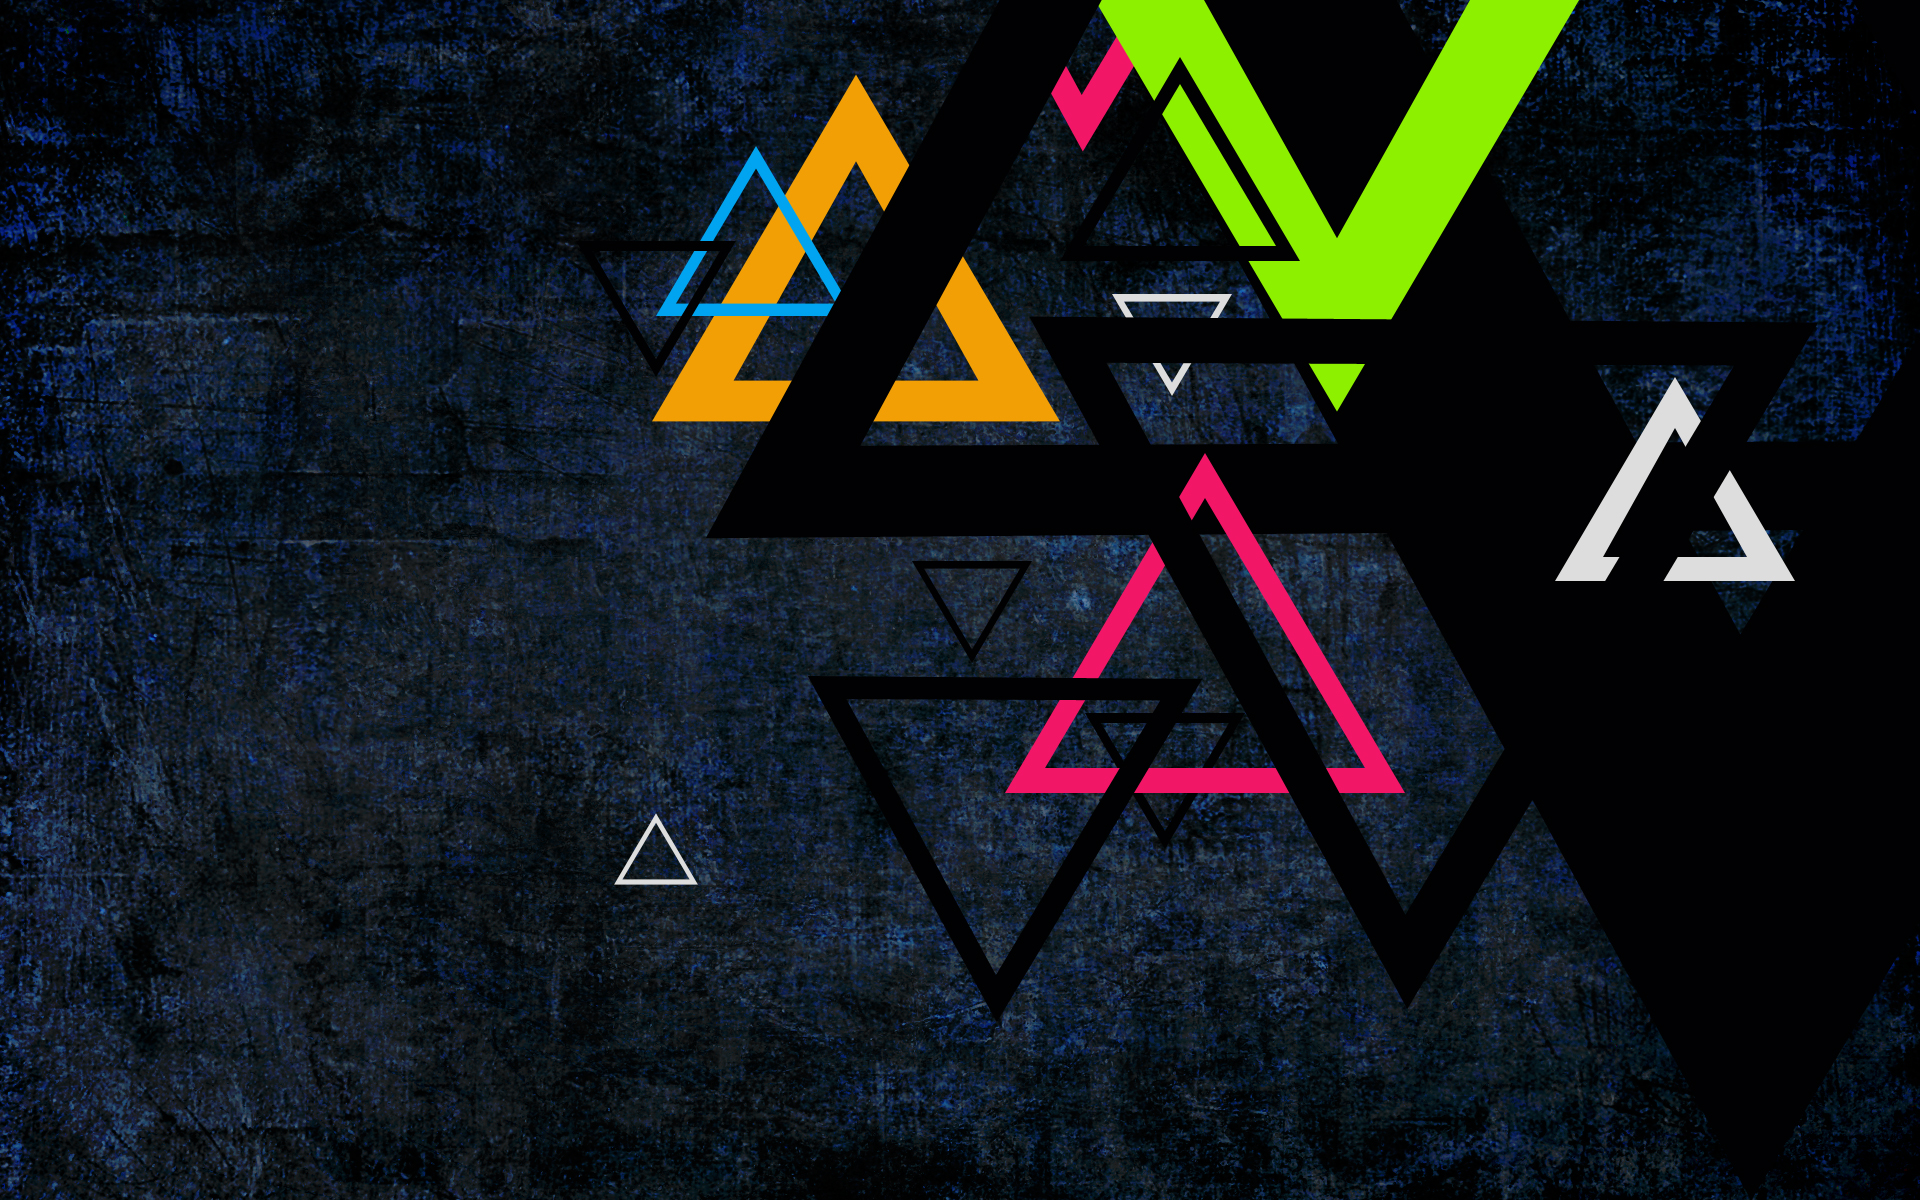 Hope You Like This HD Retro Wallpaper With Abstract Shapes Pack Enjoy